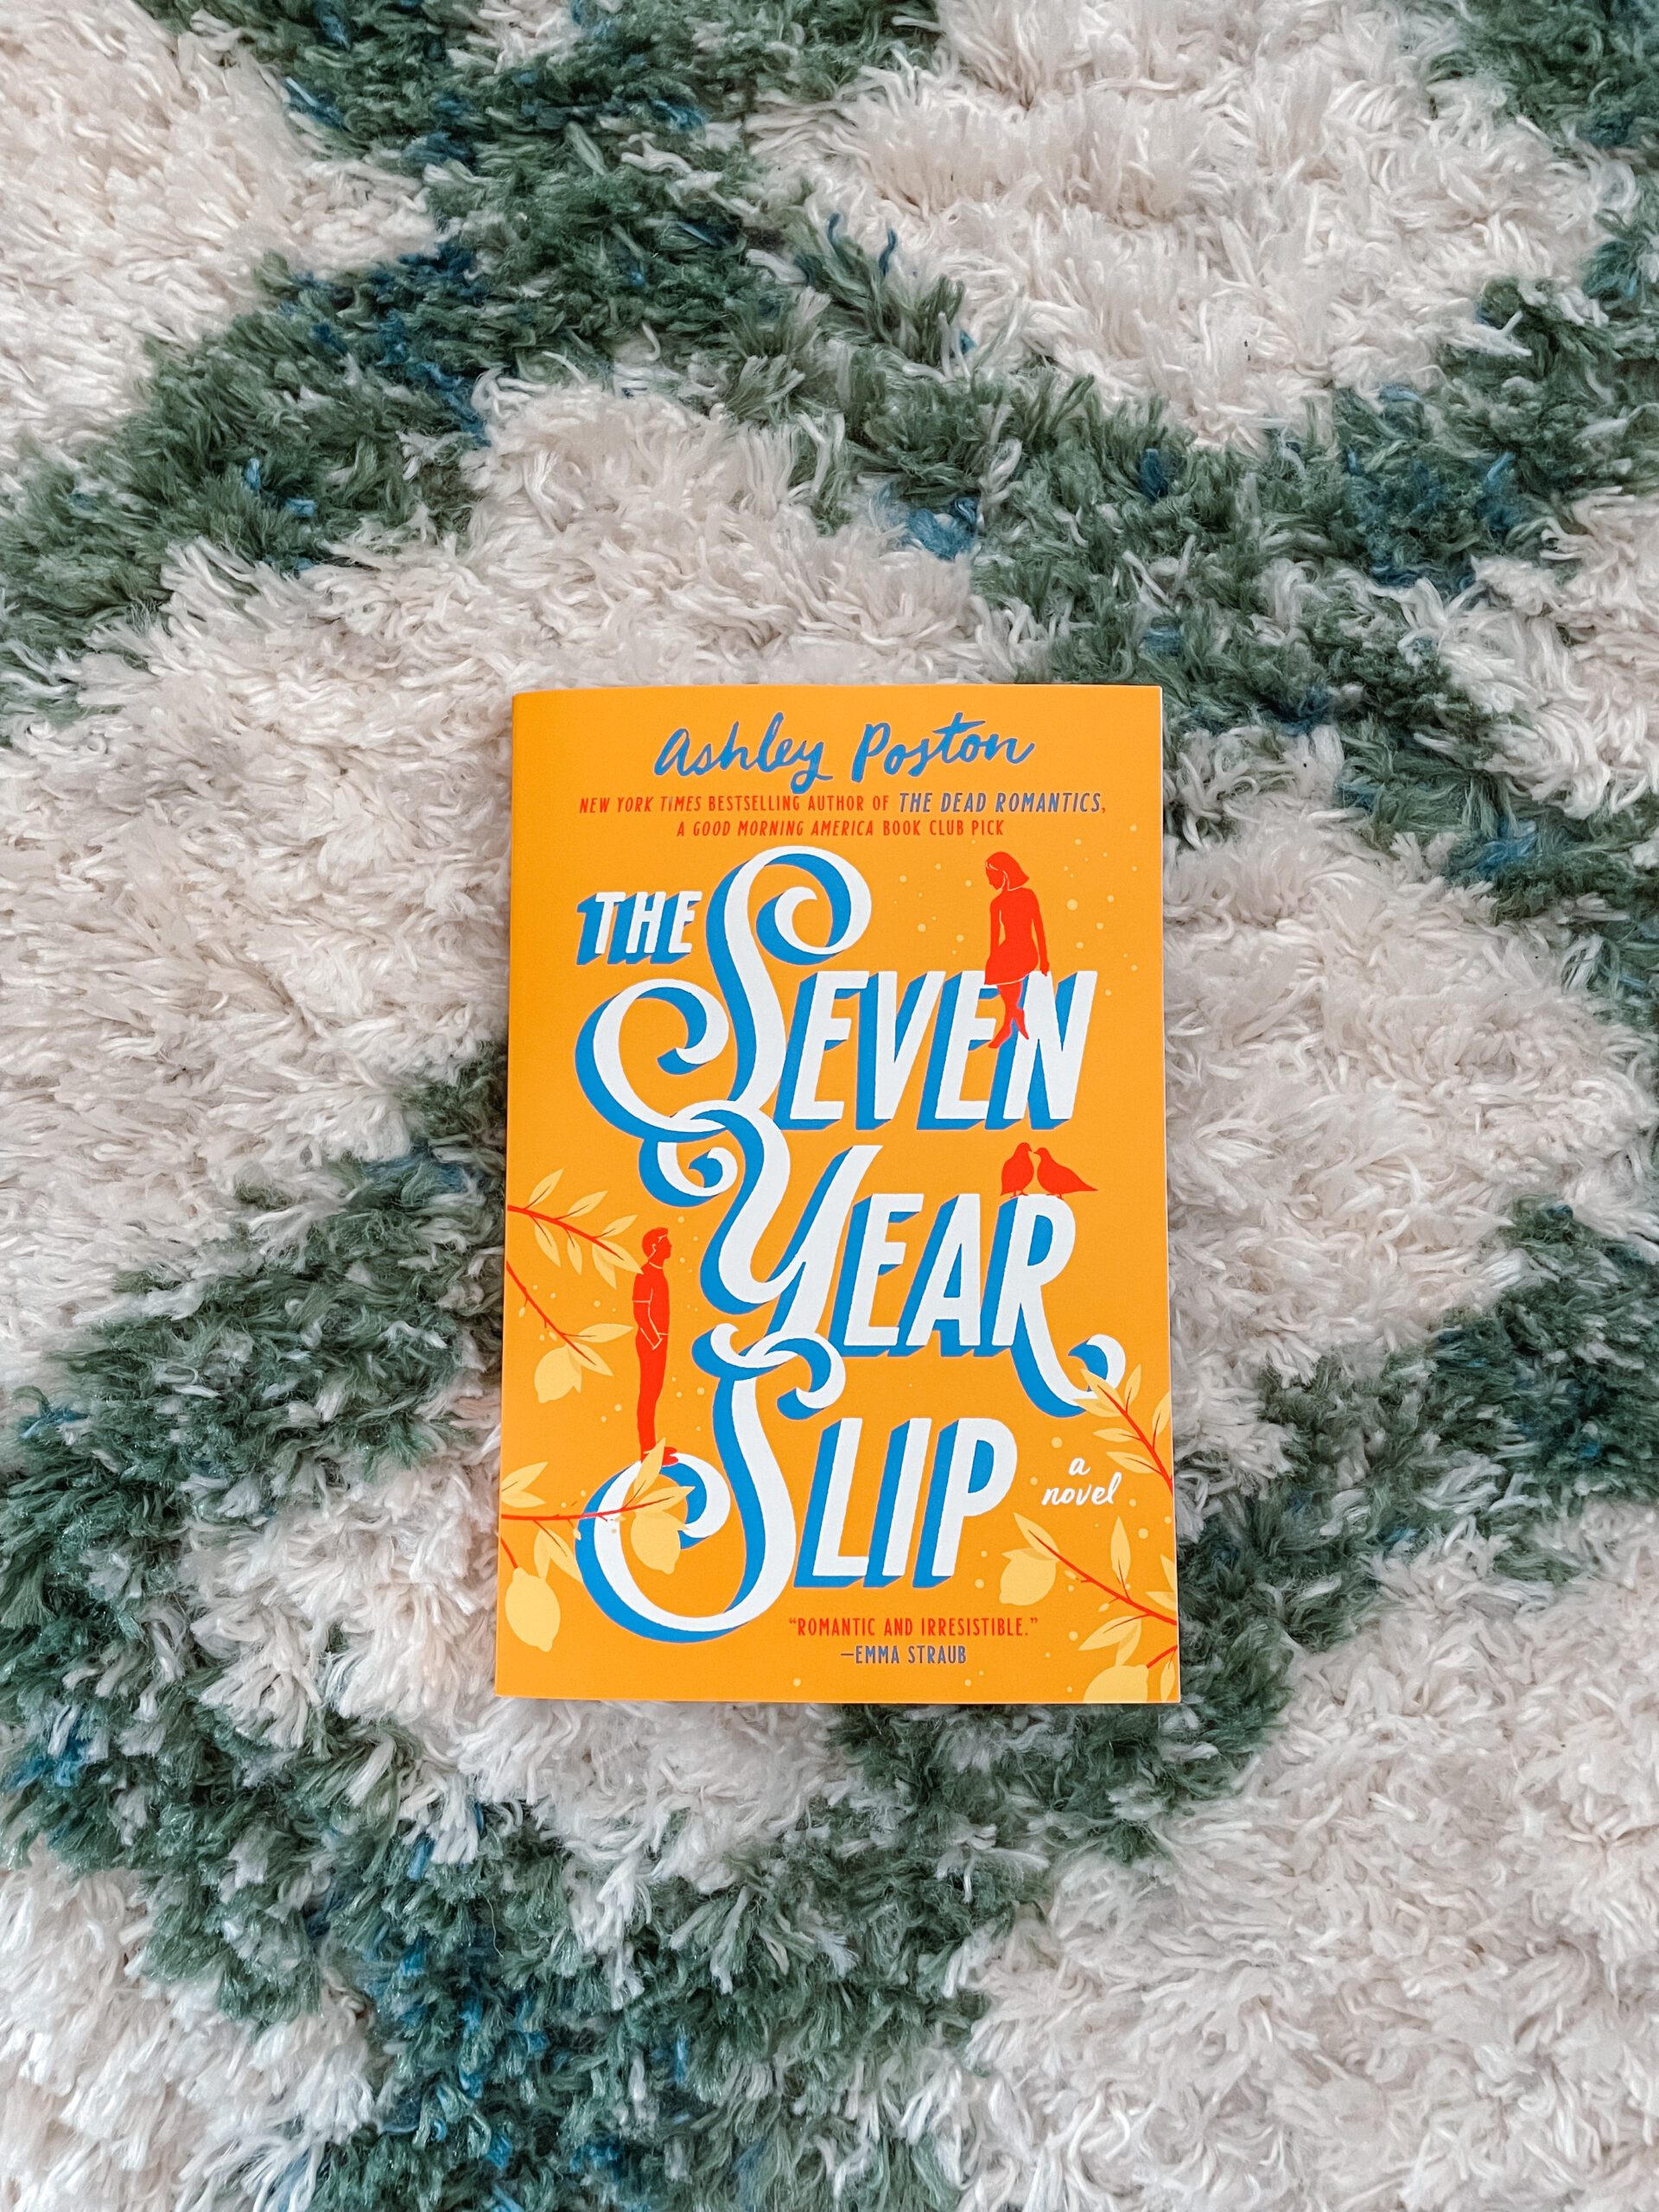 THE SEVEN YEAR SLIP BY ASHLEY POSTON // blog tour book review